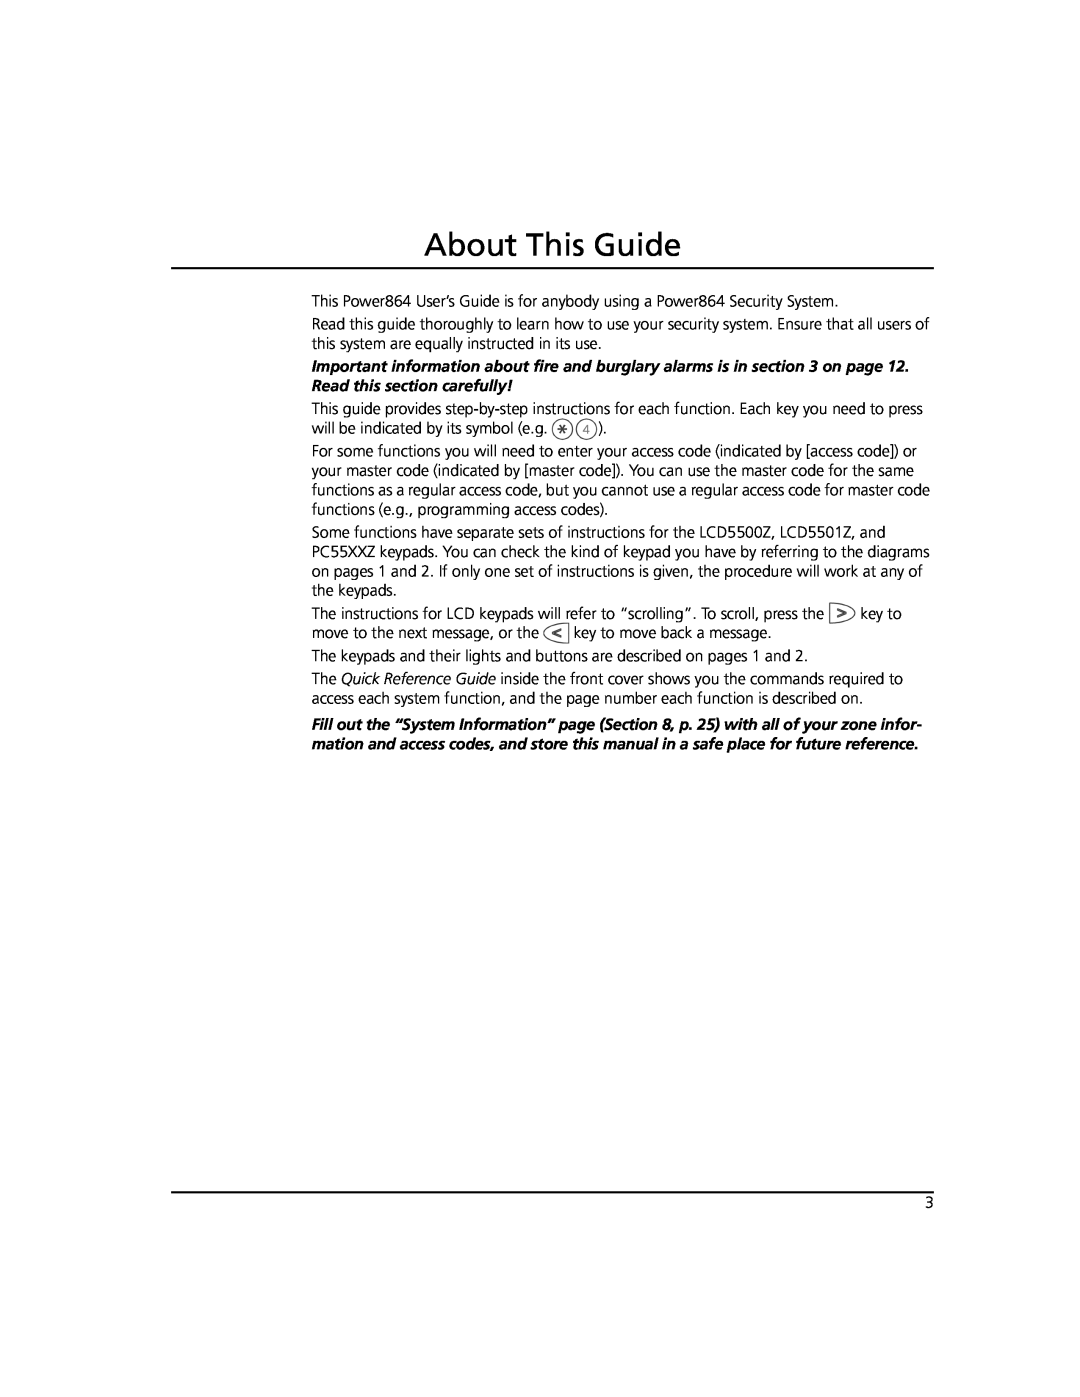 ADT Security Services Power 864 manual About This Guide 